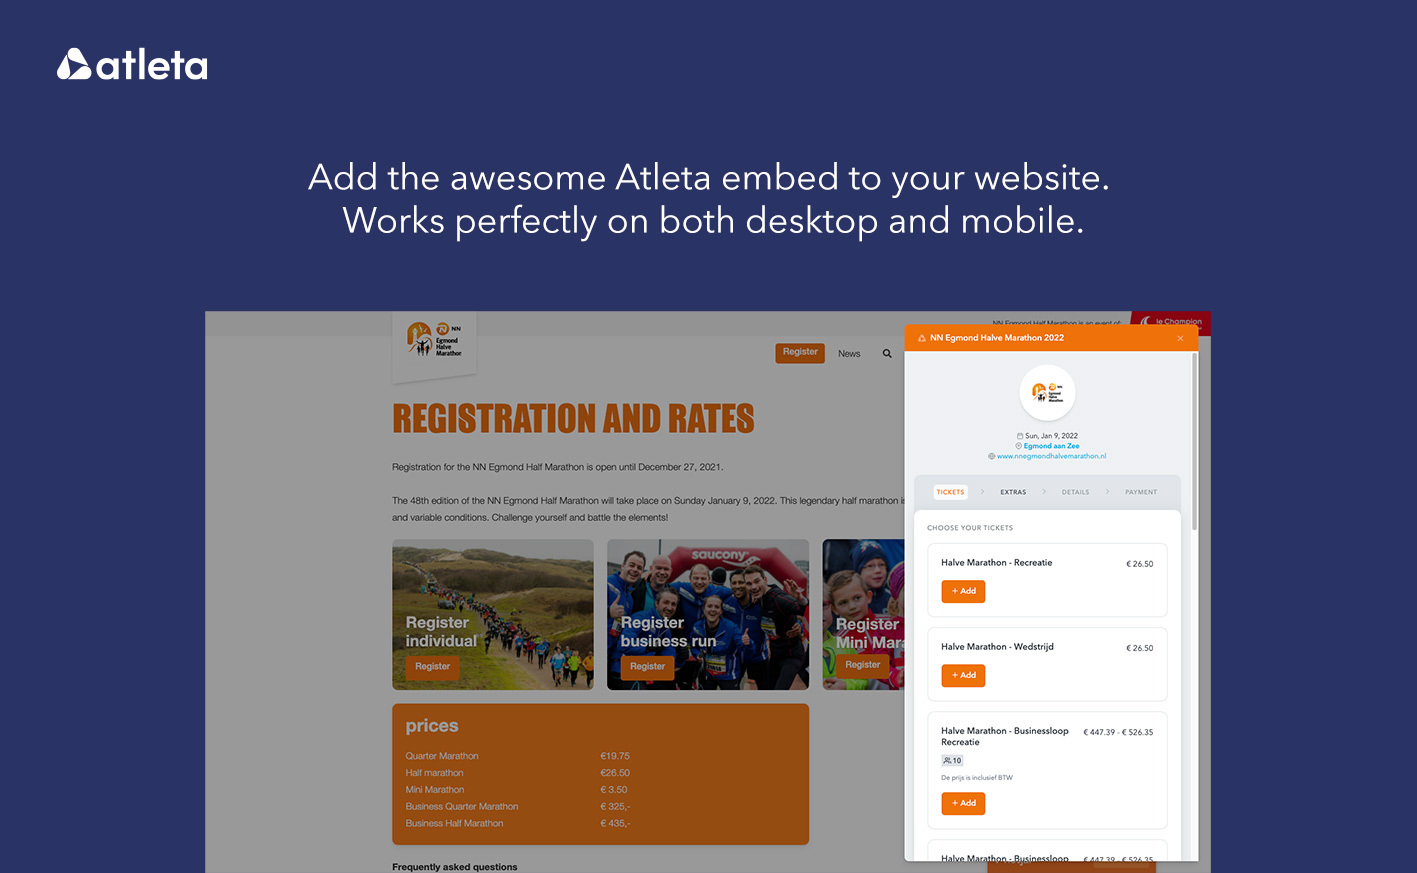 Add the awesome Atleta embed to your website. Works perfectly on both desktop and mobile.